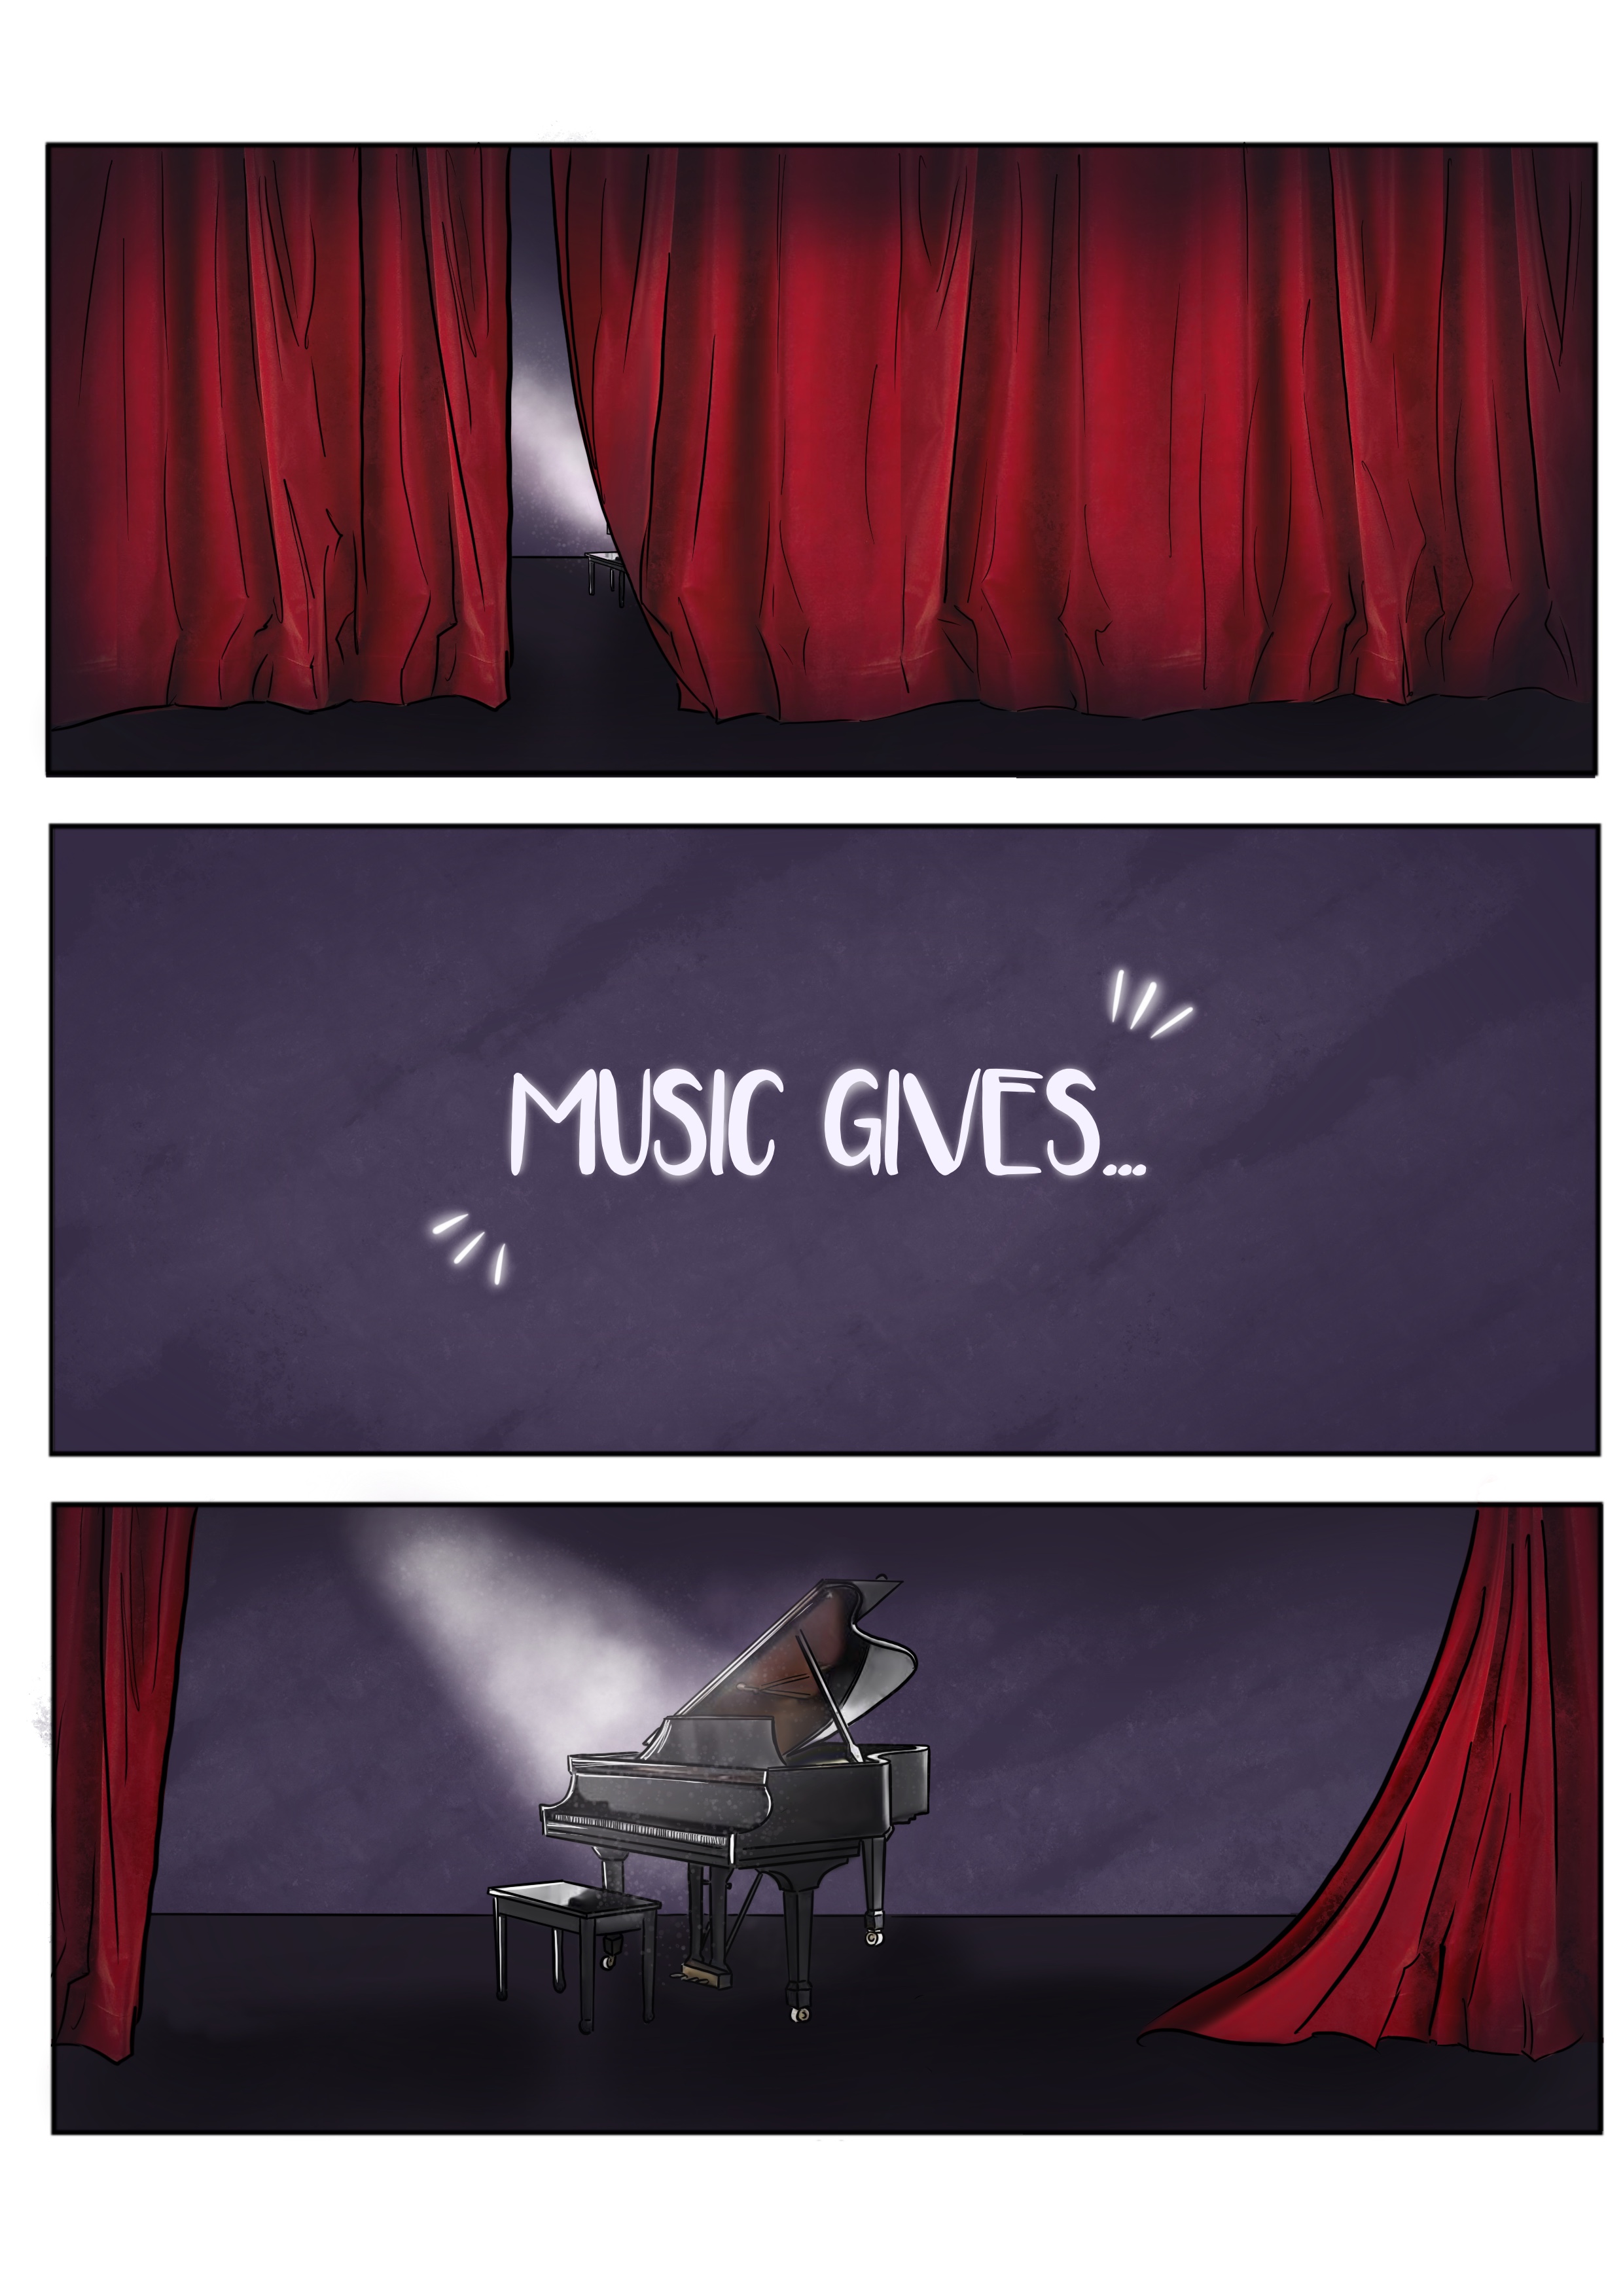 Music gives...